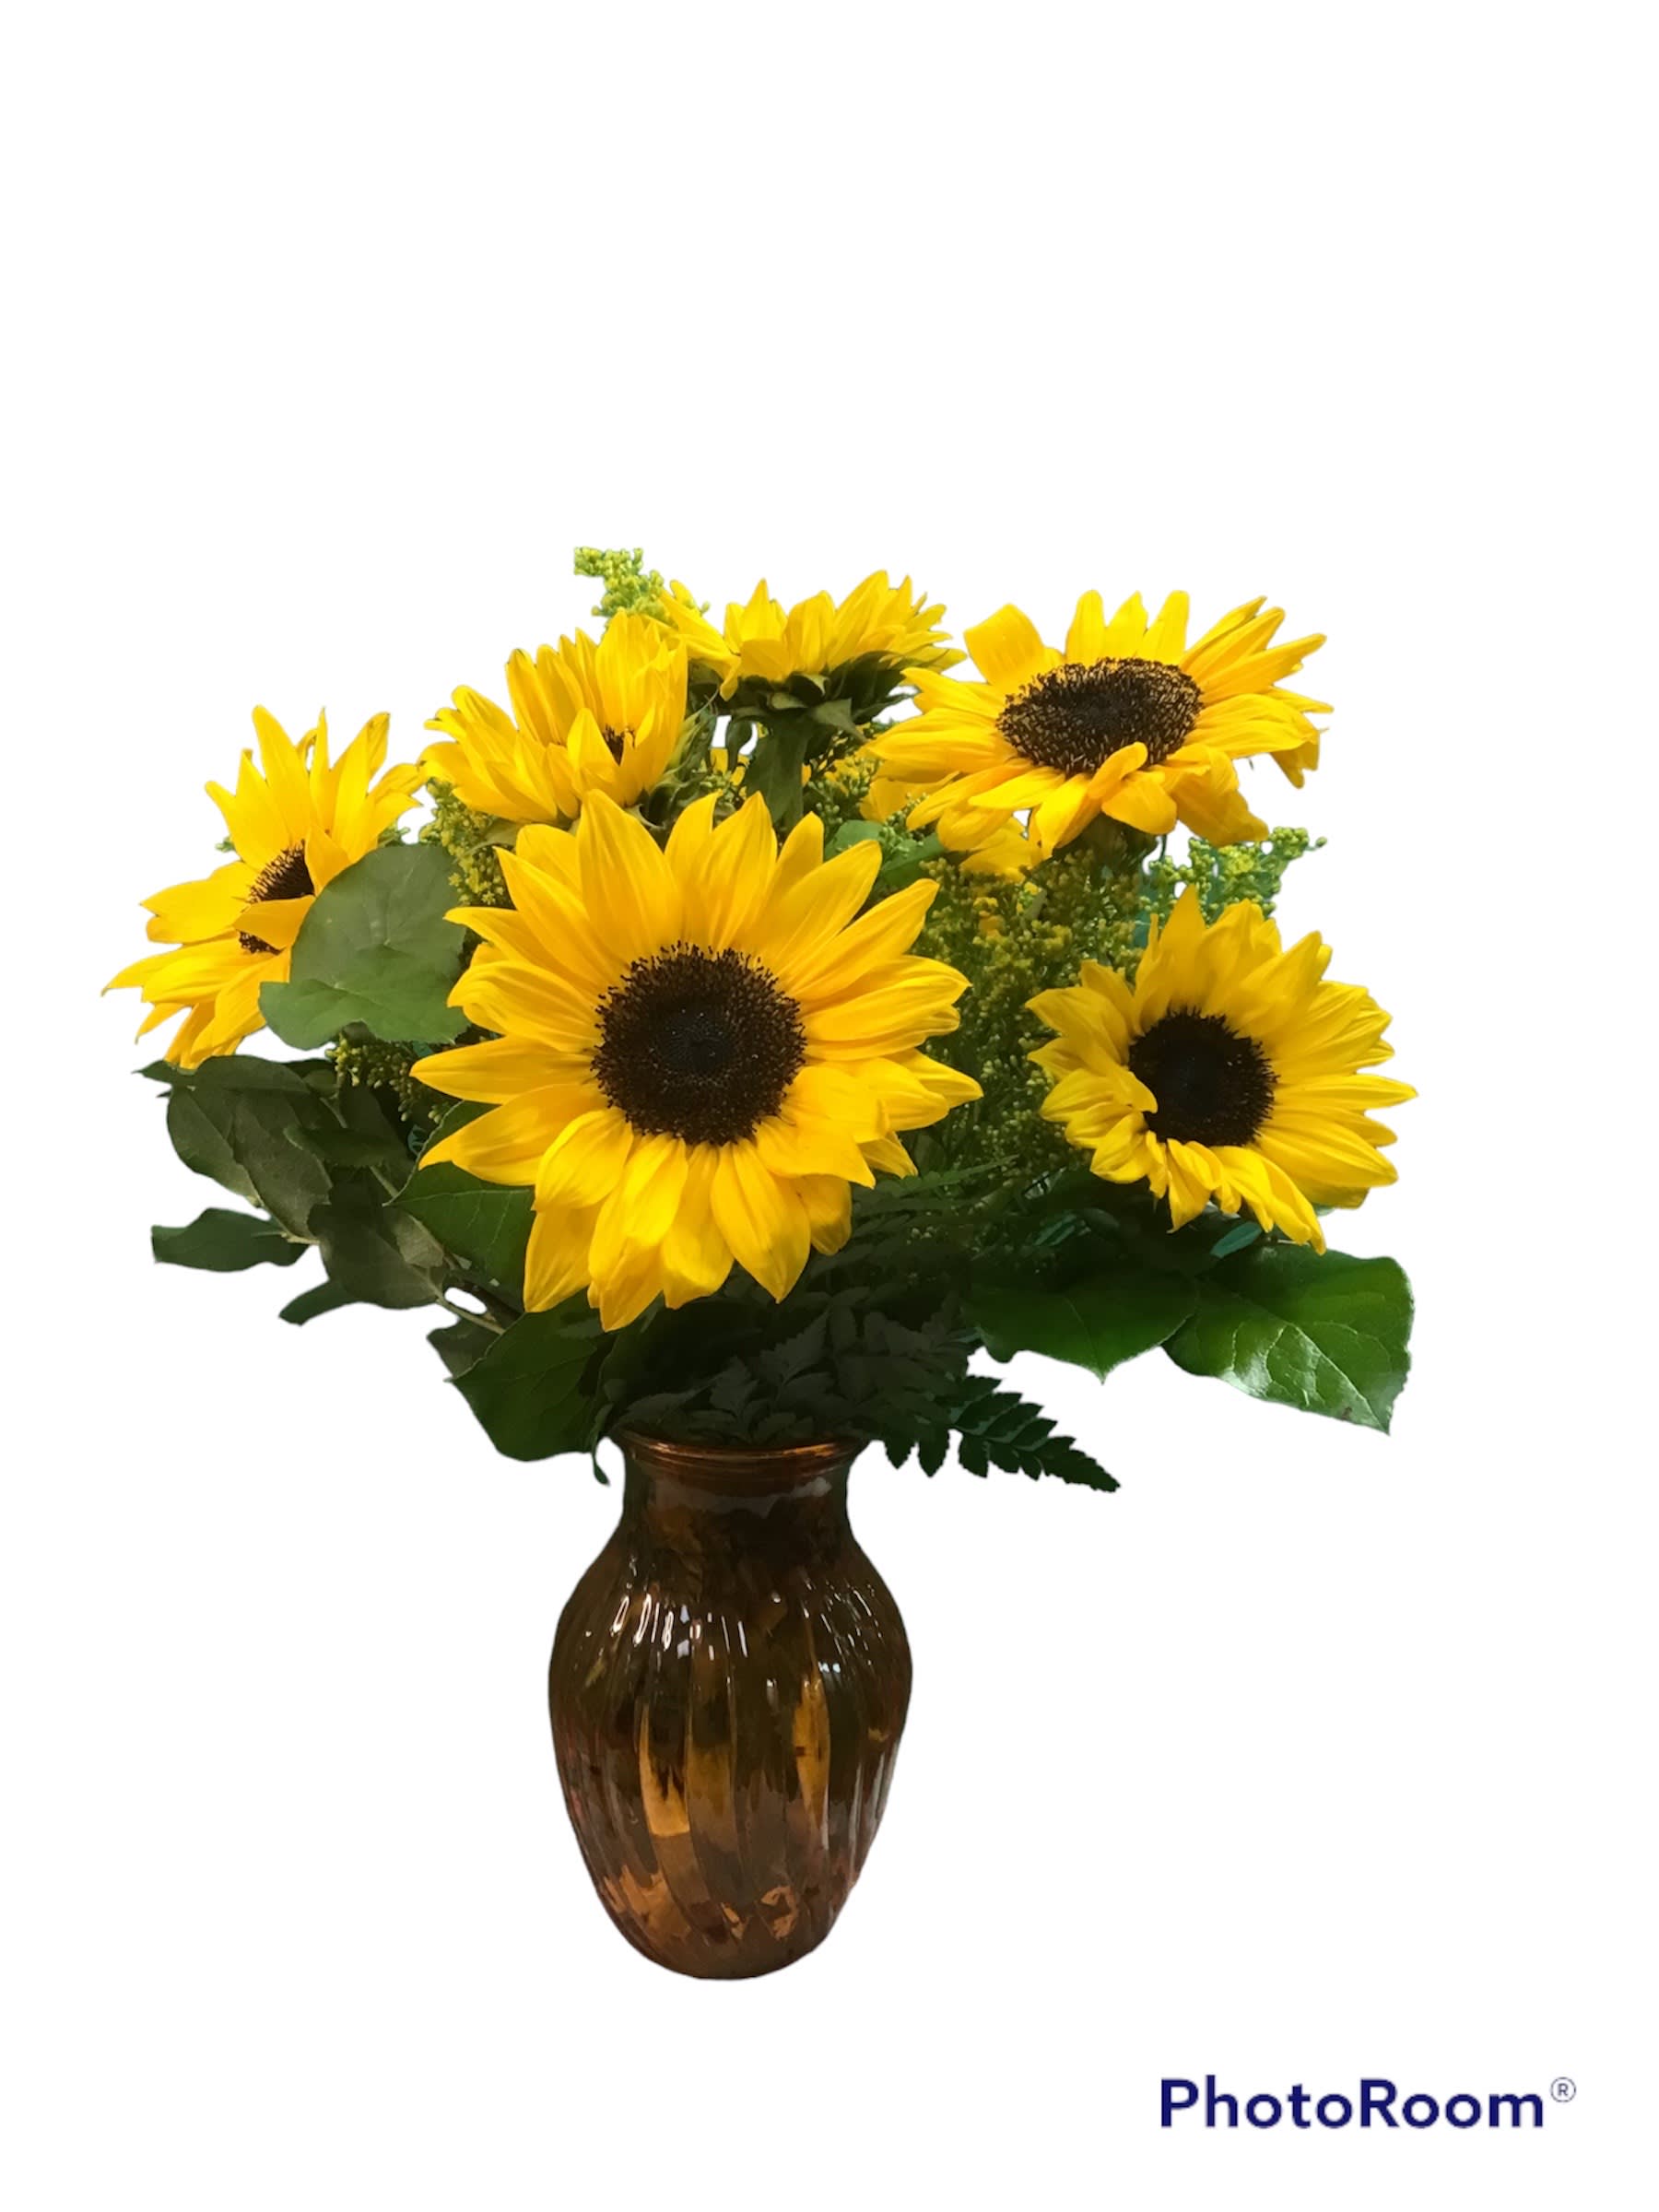 Sunshine Day by Kissimmee Florist - The sun is pretty great, but sunflowers are the greatest. Let’s prove it. We can deliver them daily to Kissimmee, St. Cloud, the Walt Disney World resort area almost anywhere the sun shines!The bouquet pictured reflects our original design for this product. While we always try to follow the color palette, we may replace stems to deliver the freshest bouquet possible, and we may sometimes need to use a different vase.